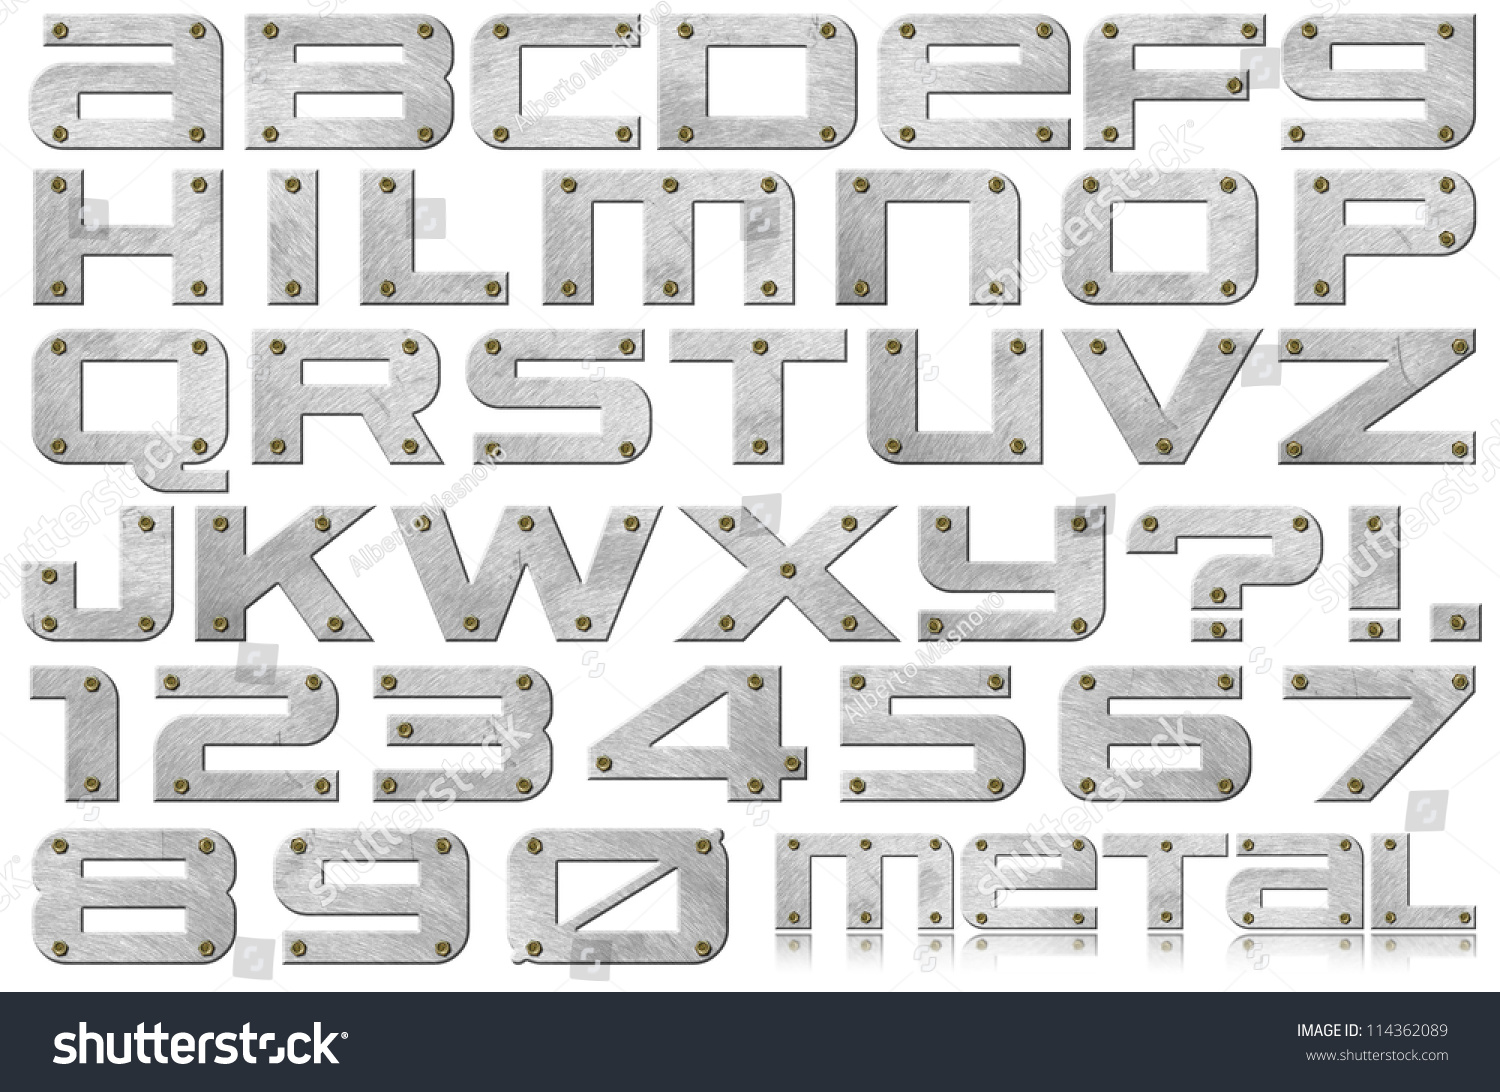 stock-photo-metal-letters-and-numbers-me